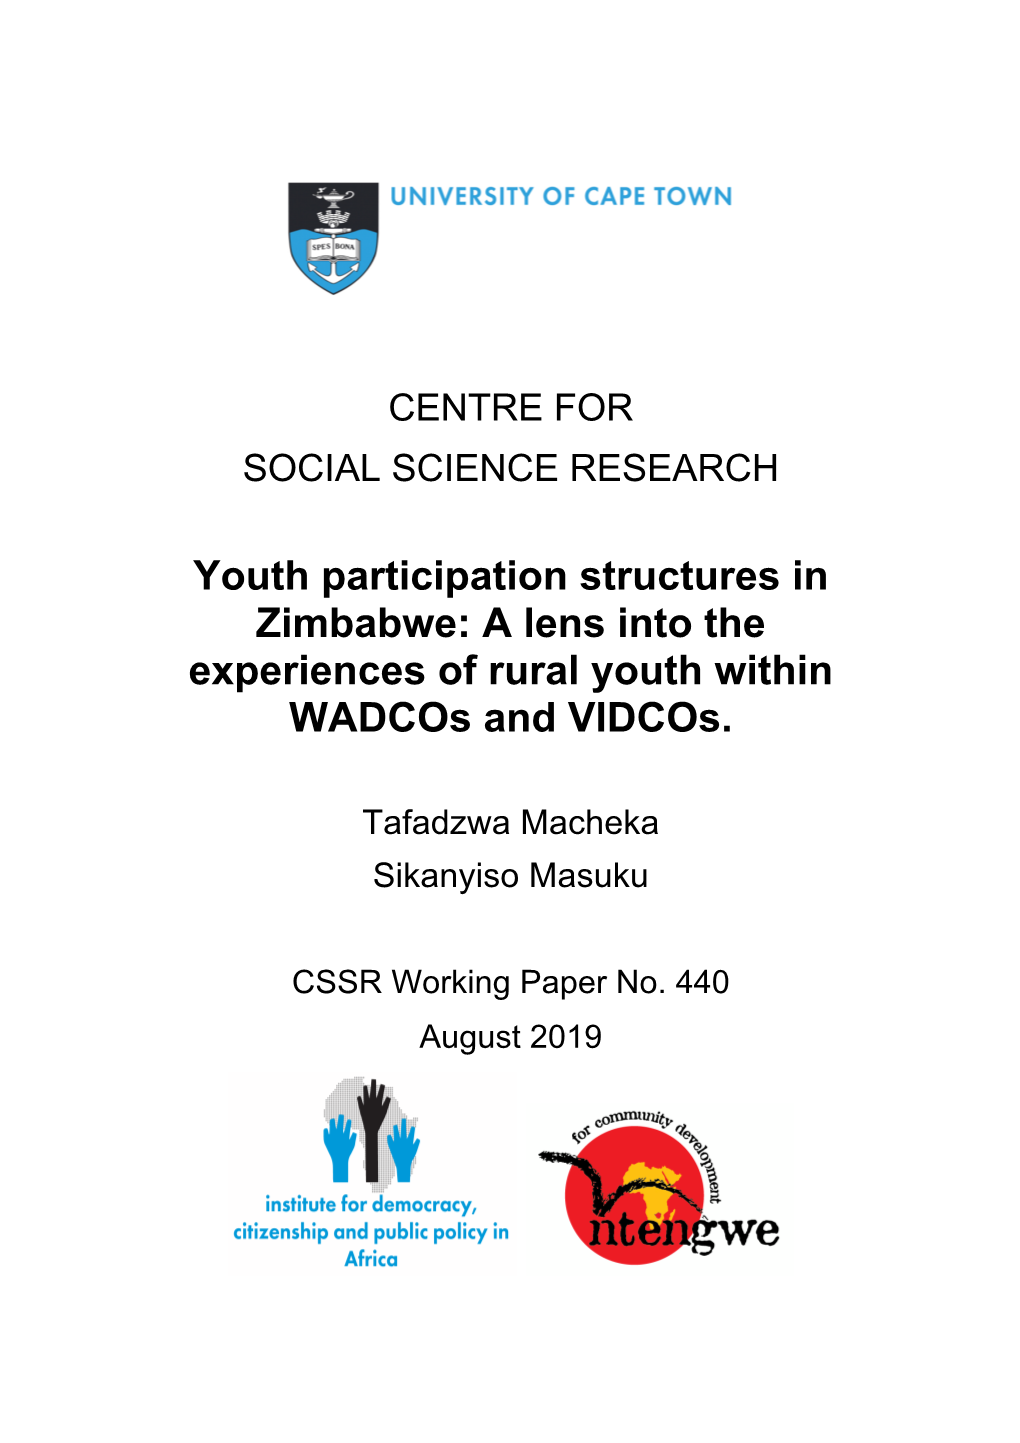 Youth Participation Structures in Zimbabwe: a Lens Into the Experiences of Rural Youth Within Wadcos and Vidcos